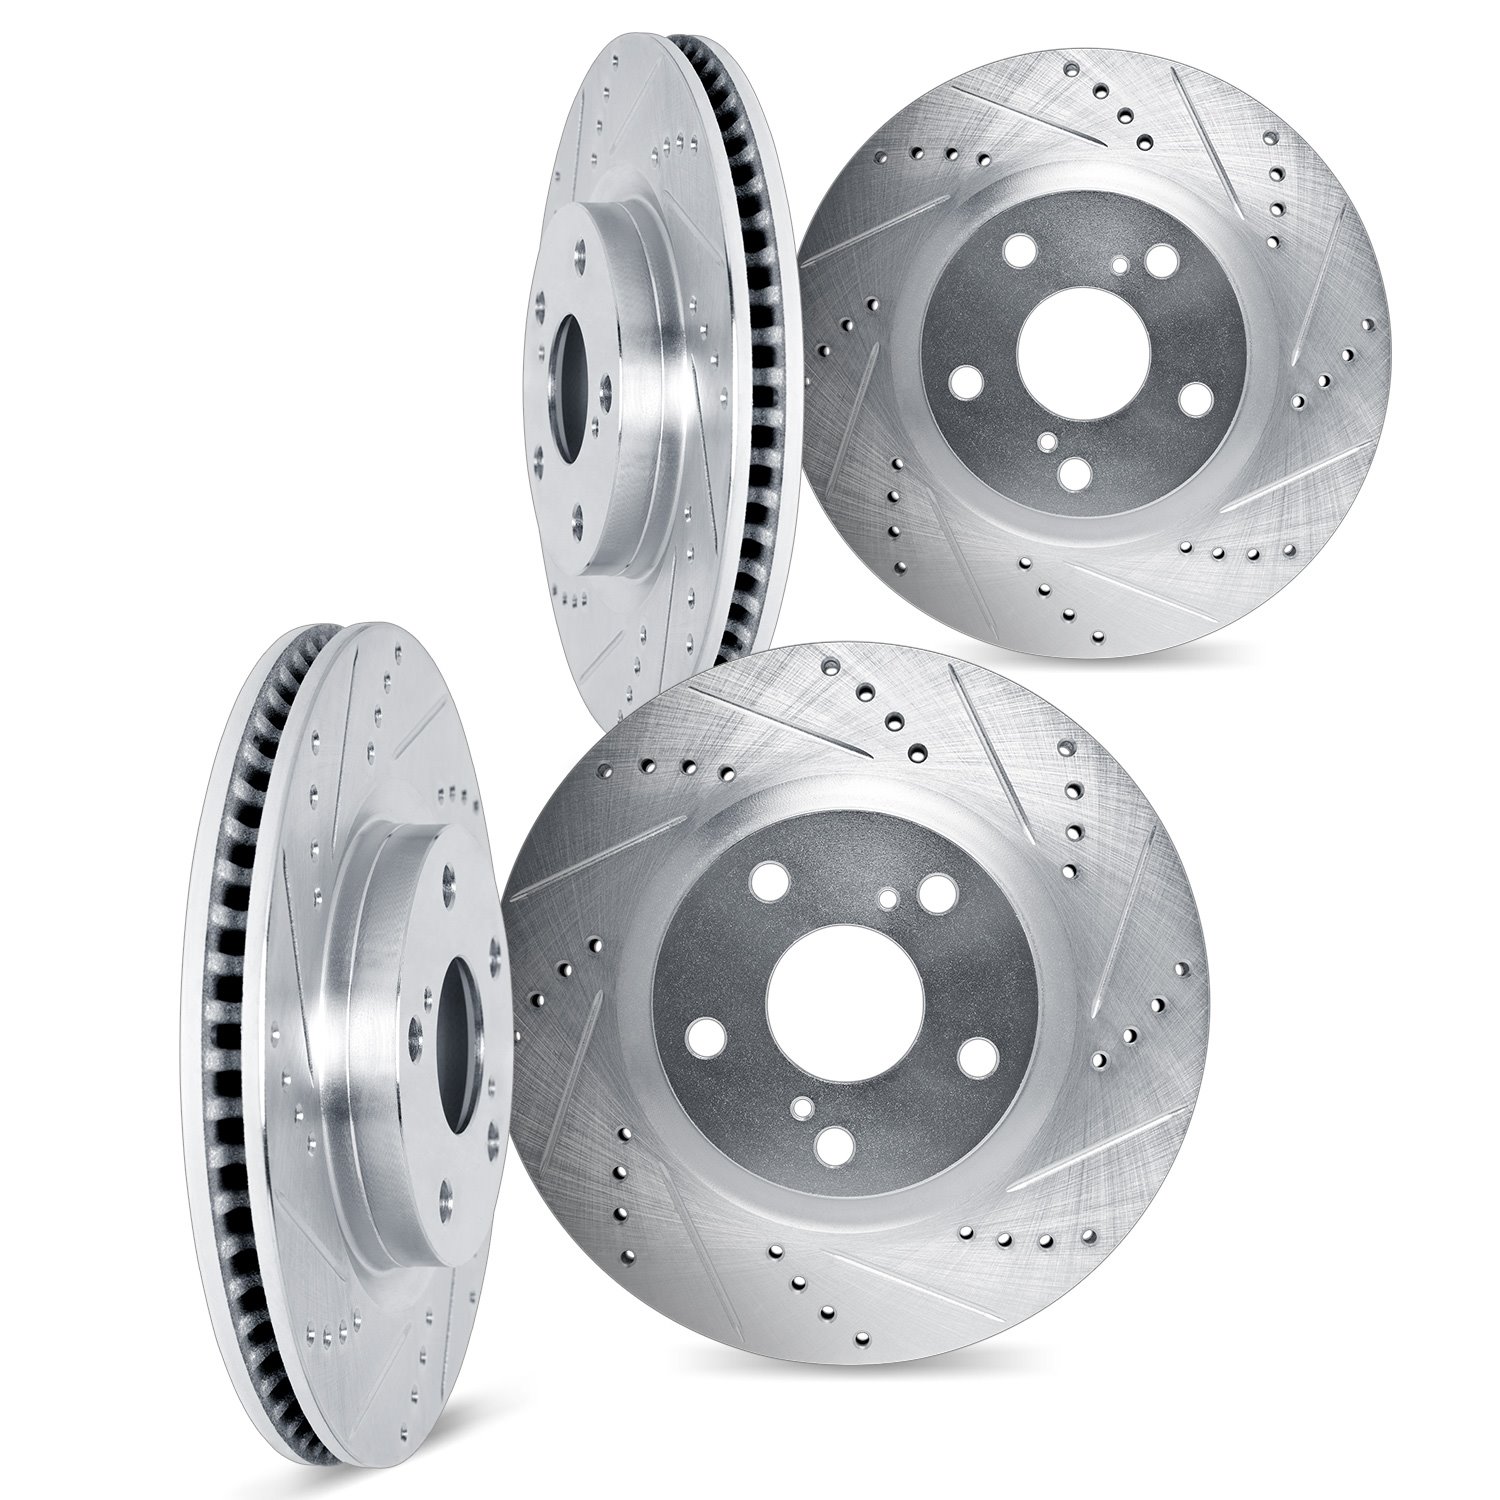 7004-73060 Drilled/Slotted Brake Rotors [Silver], 2000-2002 Audi/Volkswagen, Position: Front and Rear